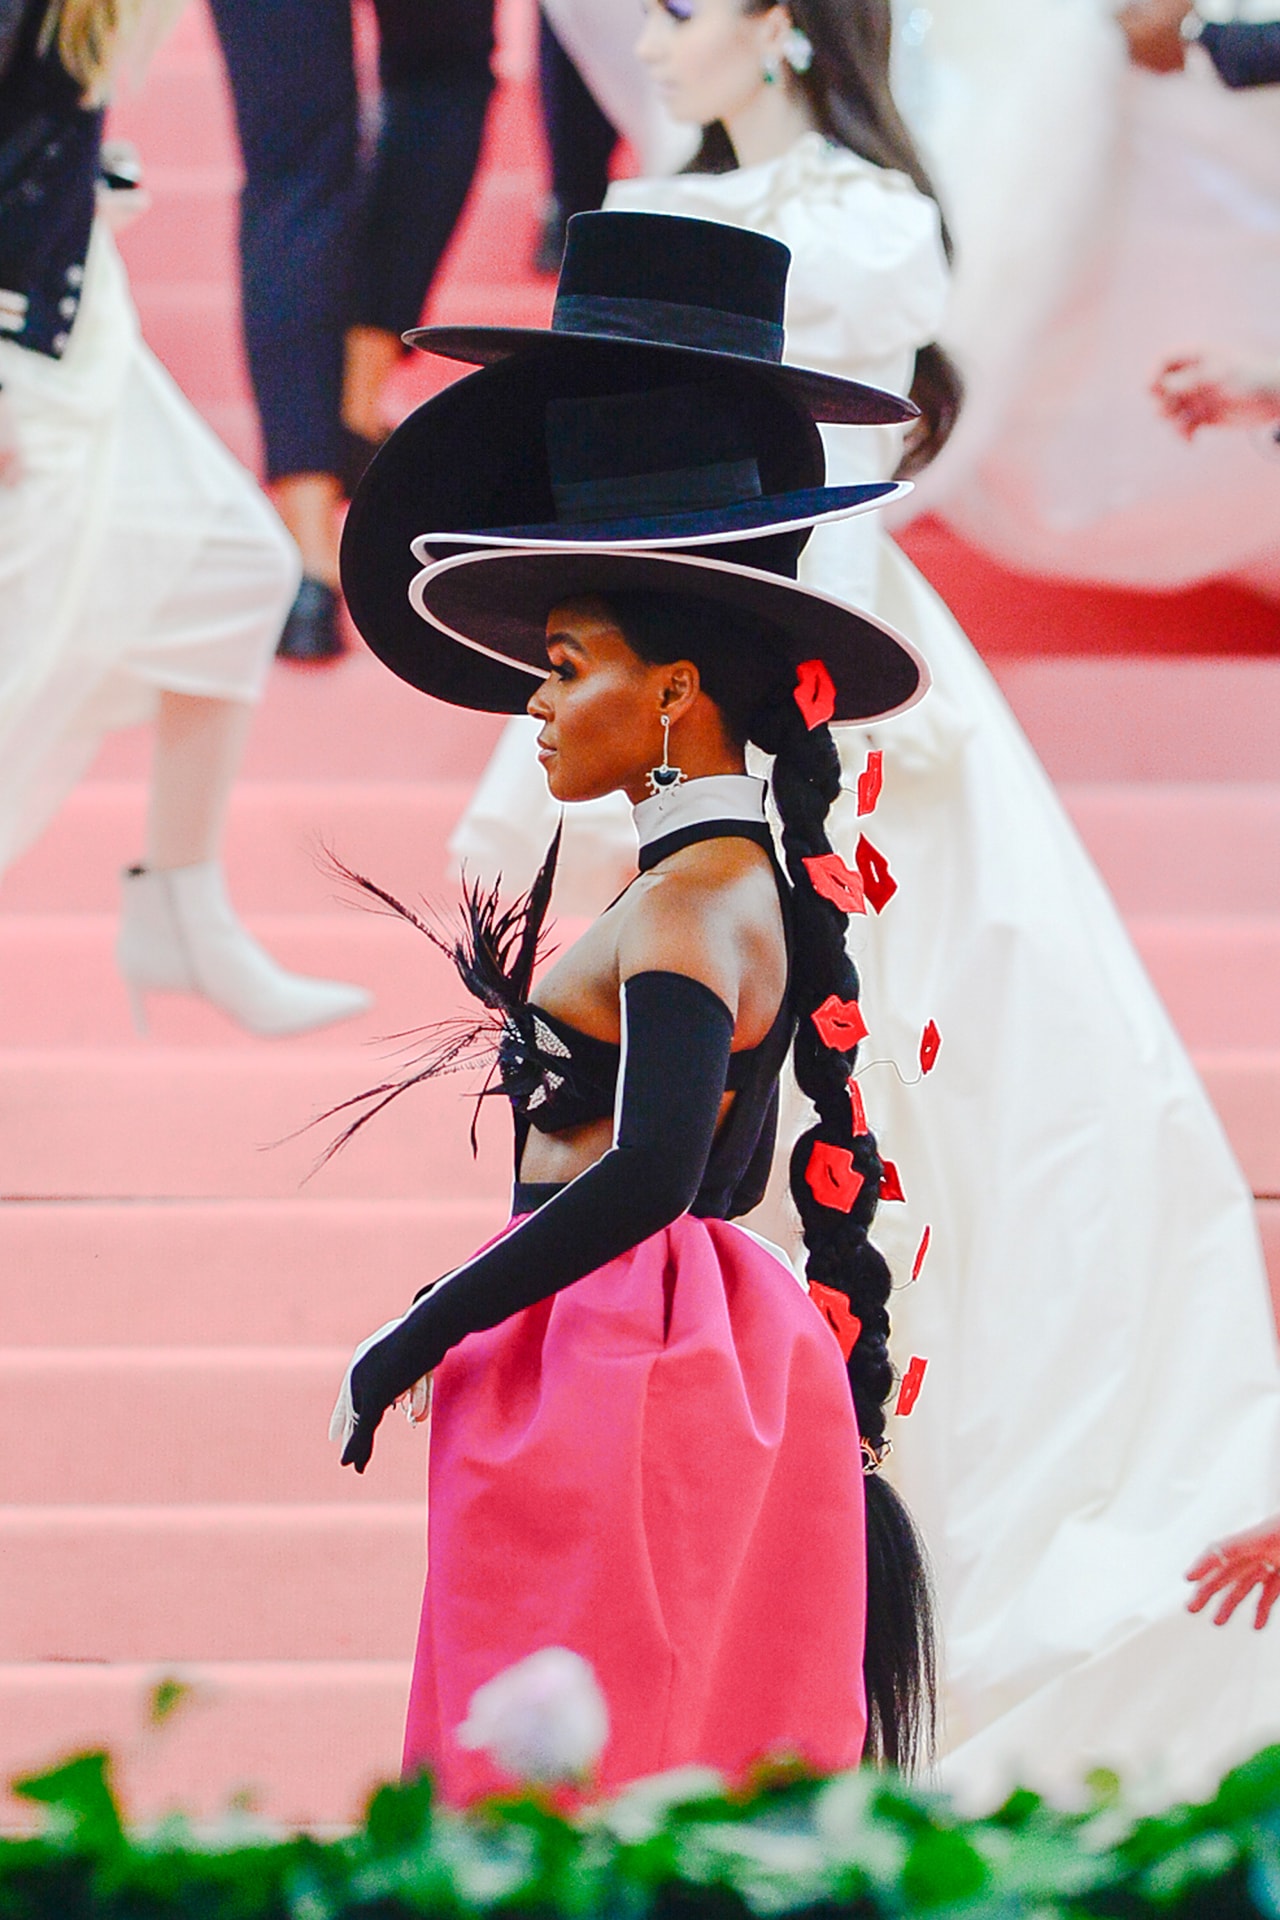 Janelle Monae Hair Hairstyle Met Gala 2019 Red Carpet Camp Notes on Fashion Kiss Lips Ponytail Hats